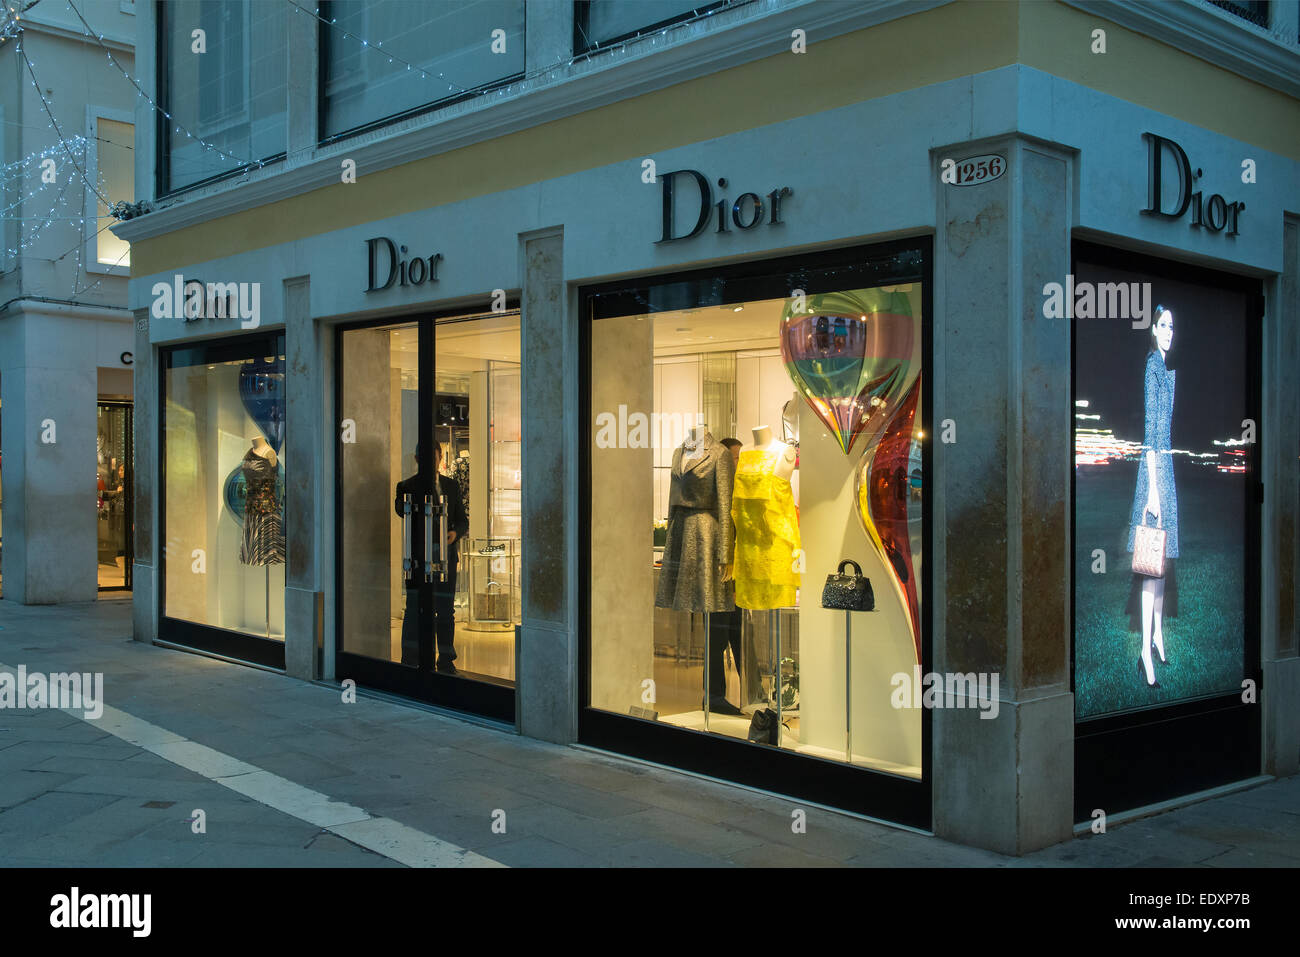 Dior Store Stock Photos & Dior Store Stock Images - Alamy